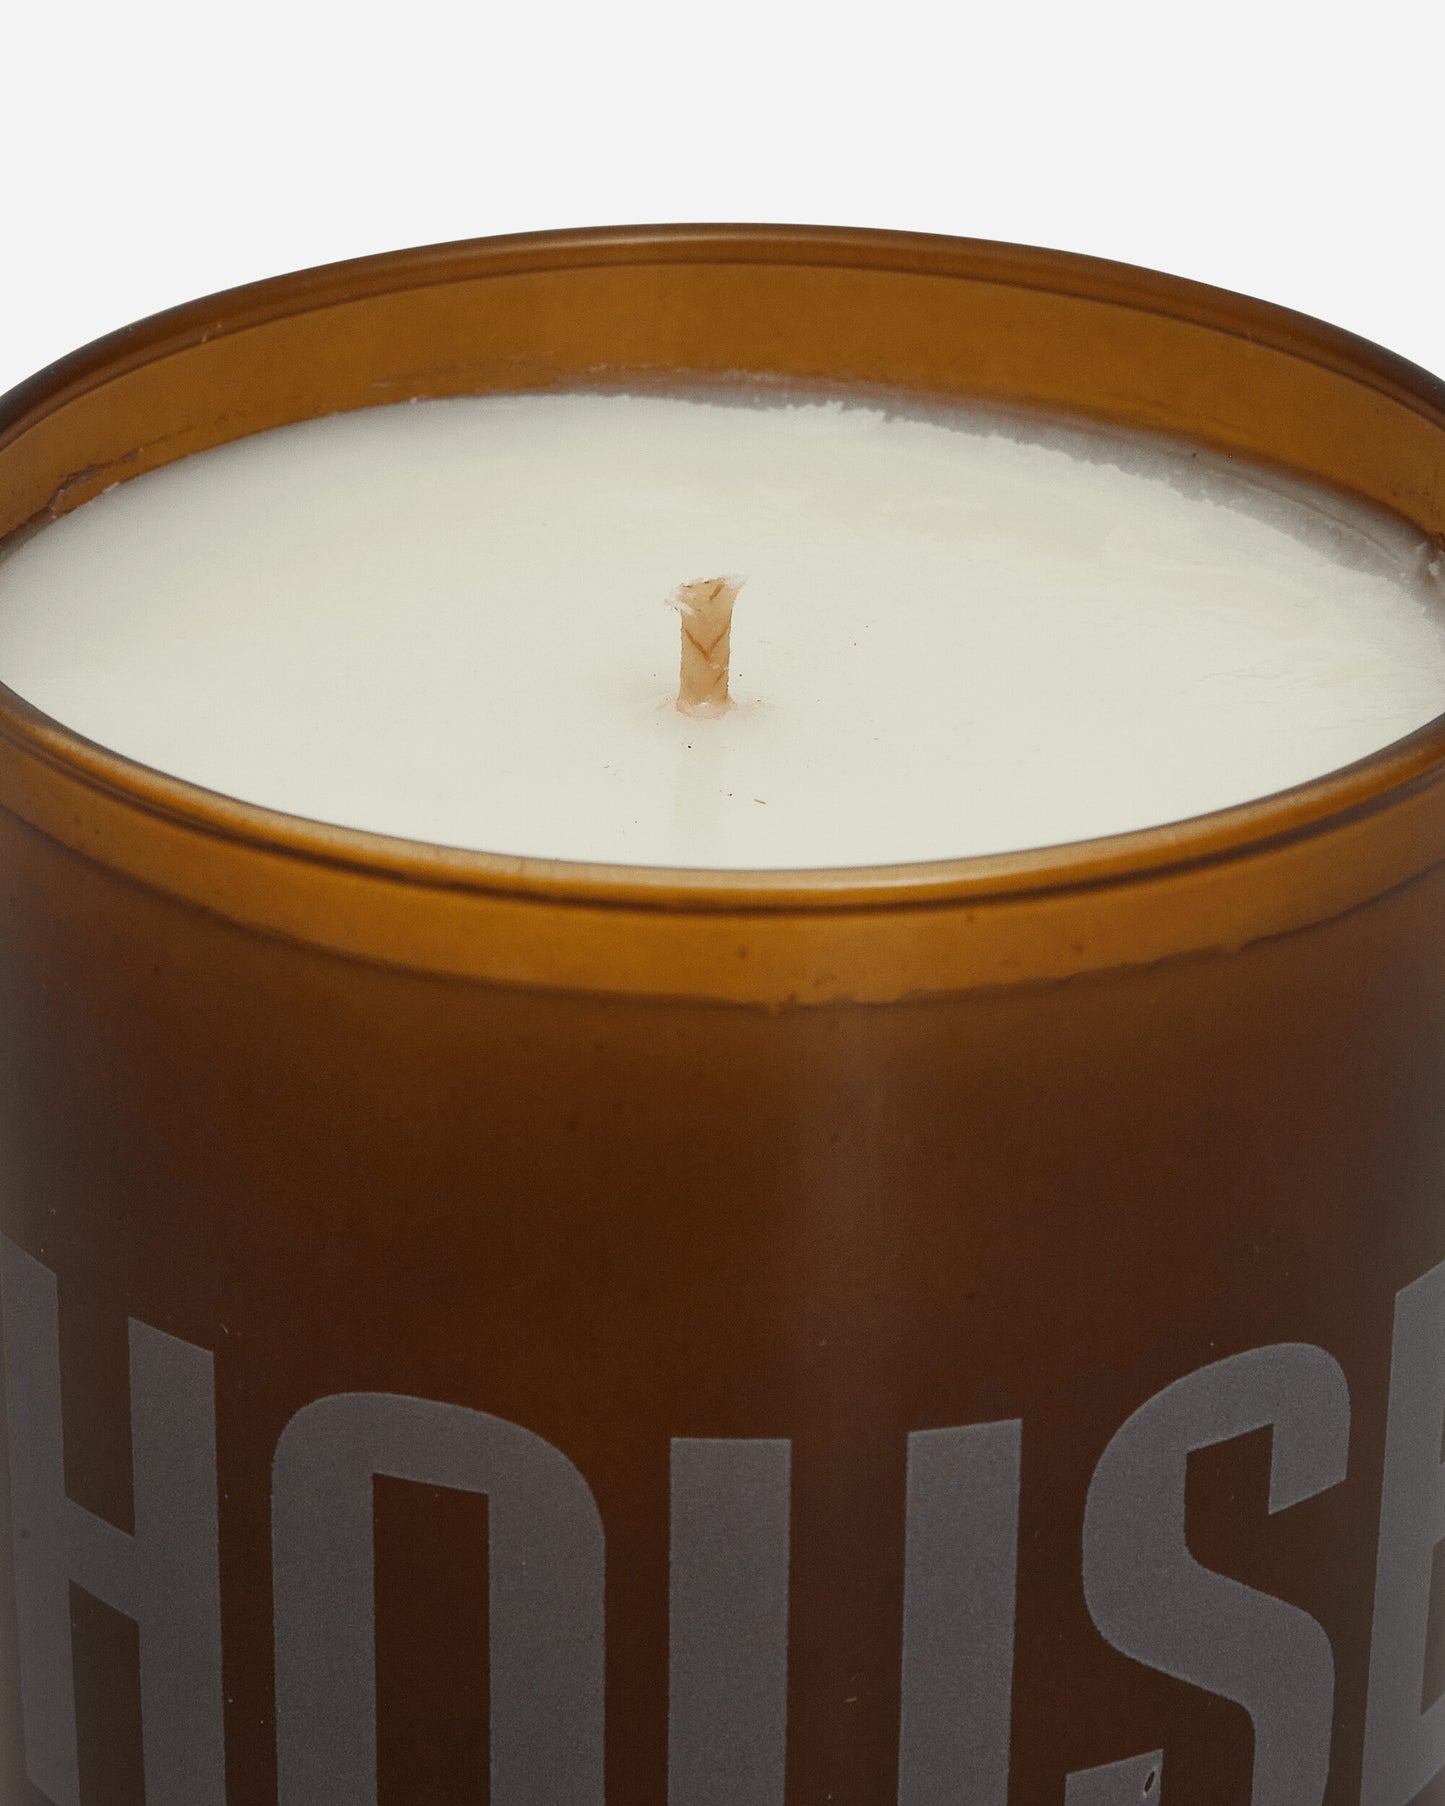 Houseplant Glass Candle Brown Home Decor Candles HP23CANDLE1 BROWN